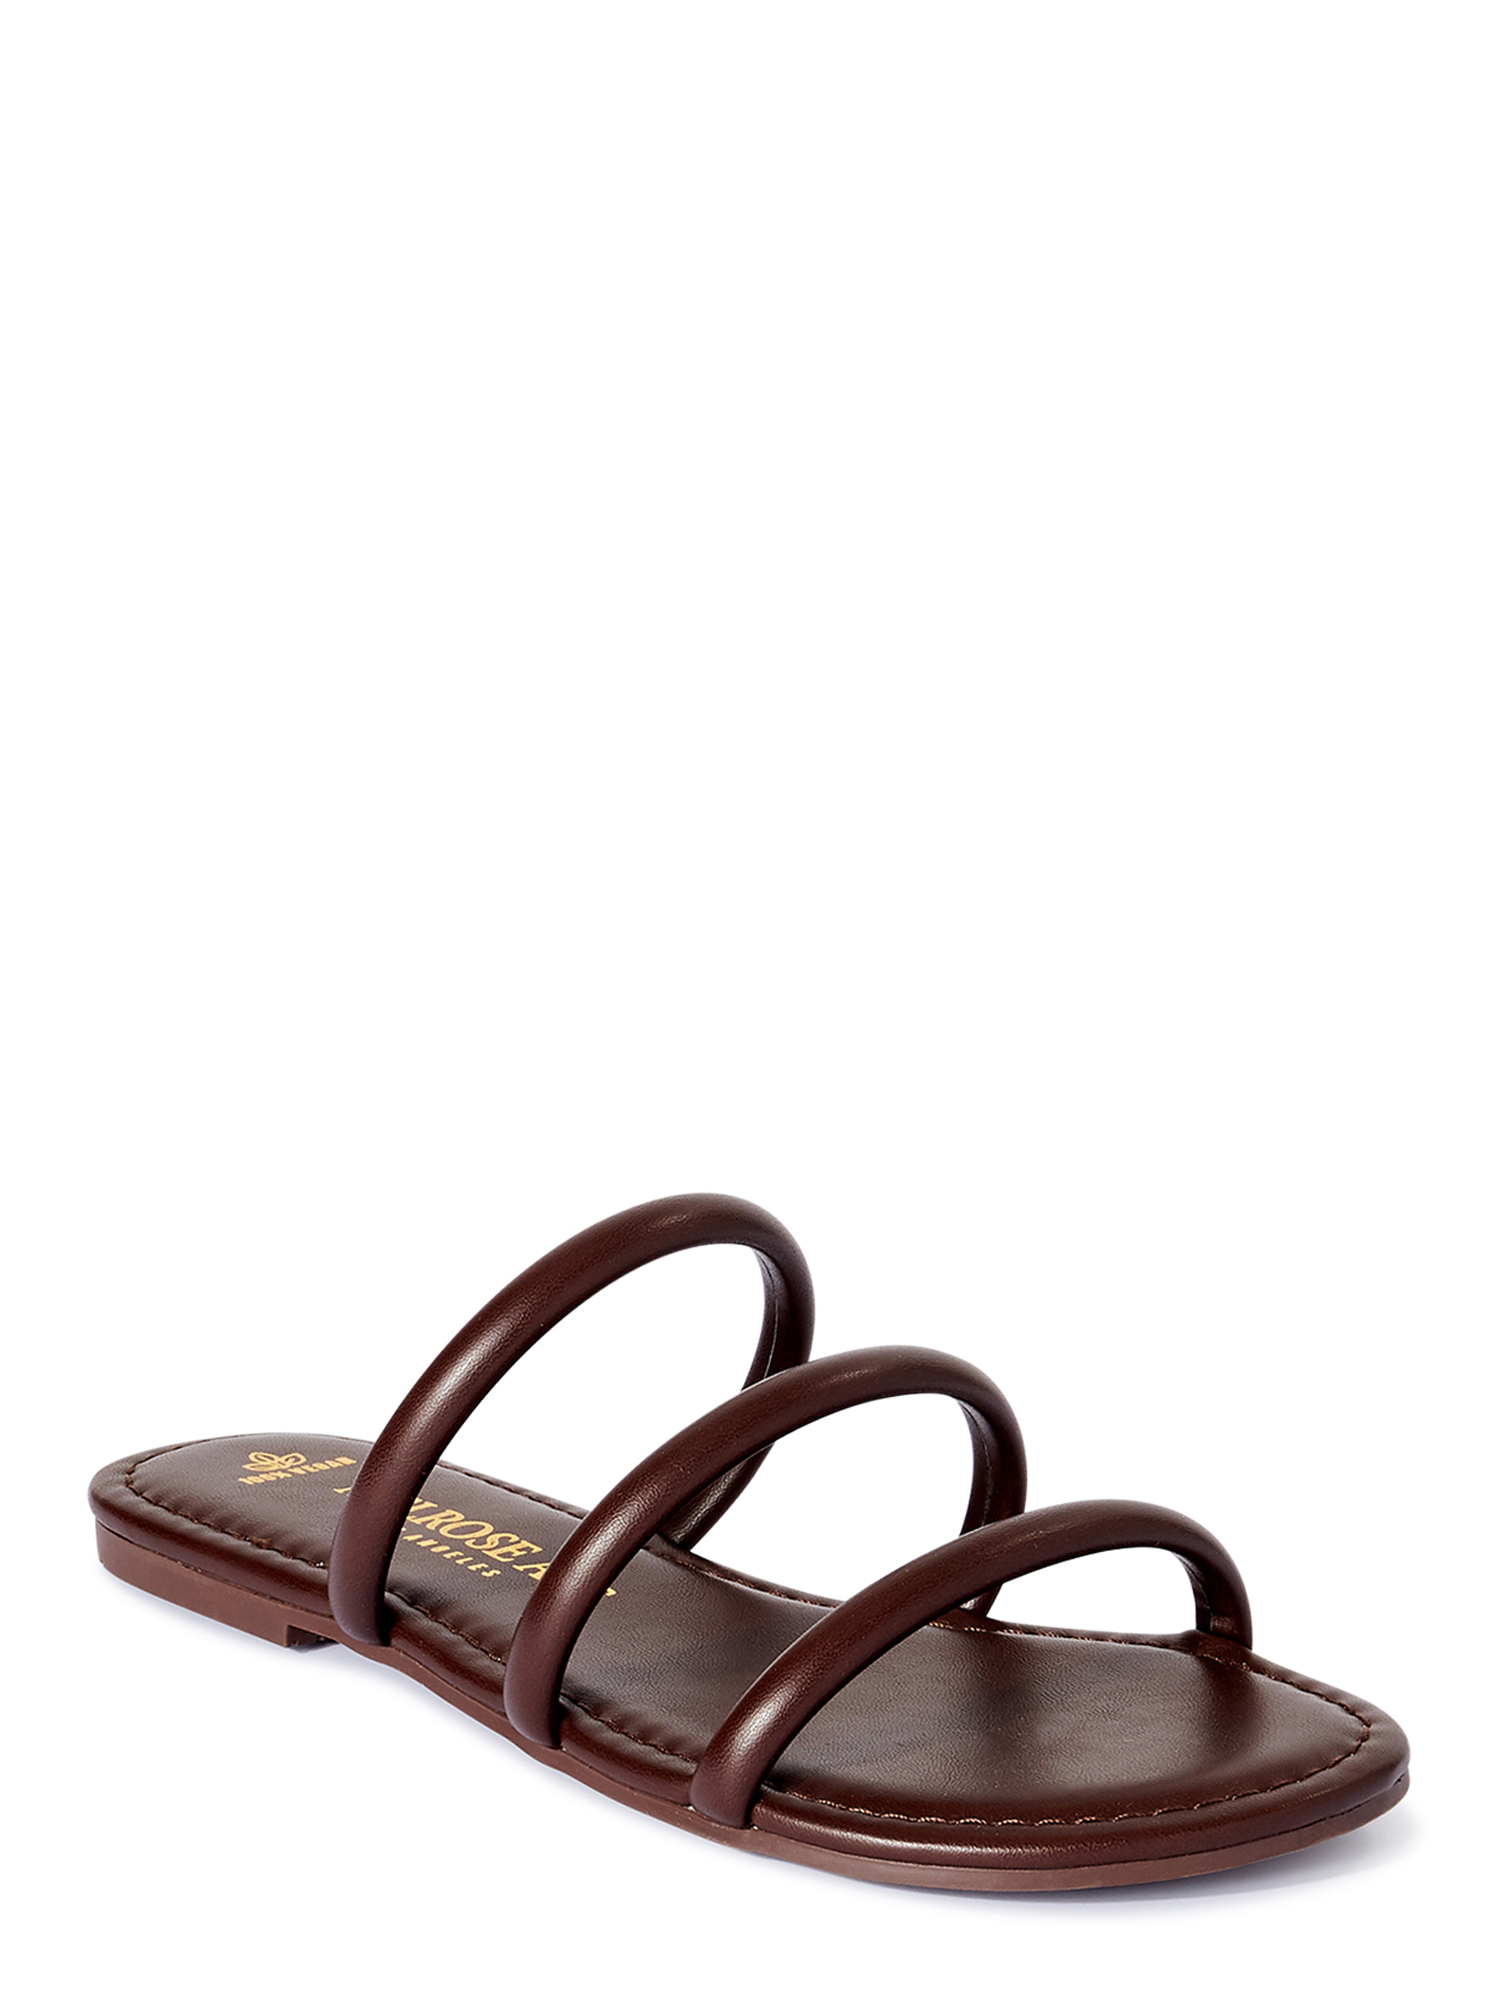 Melrose Ave Women's Faux Leather Three Strap Slide Sandals - image 1 of 6